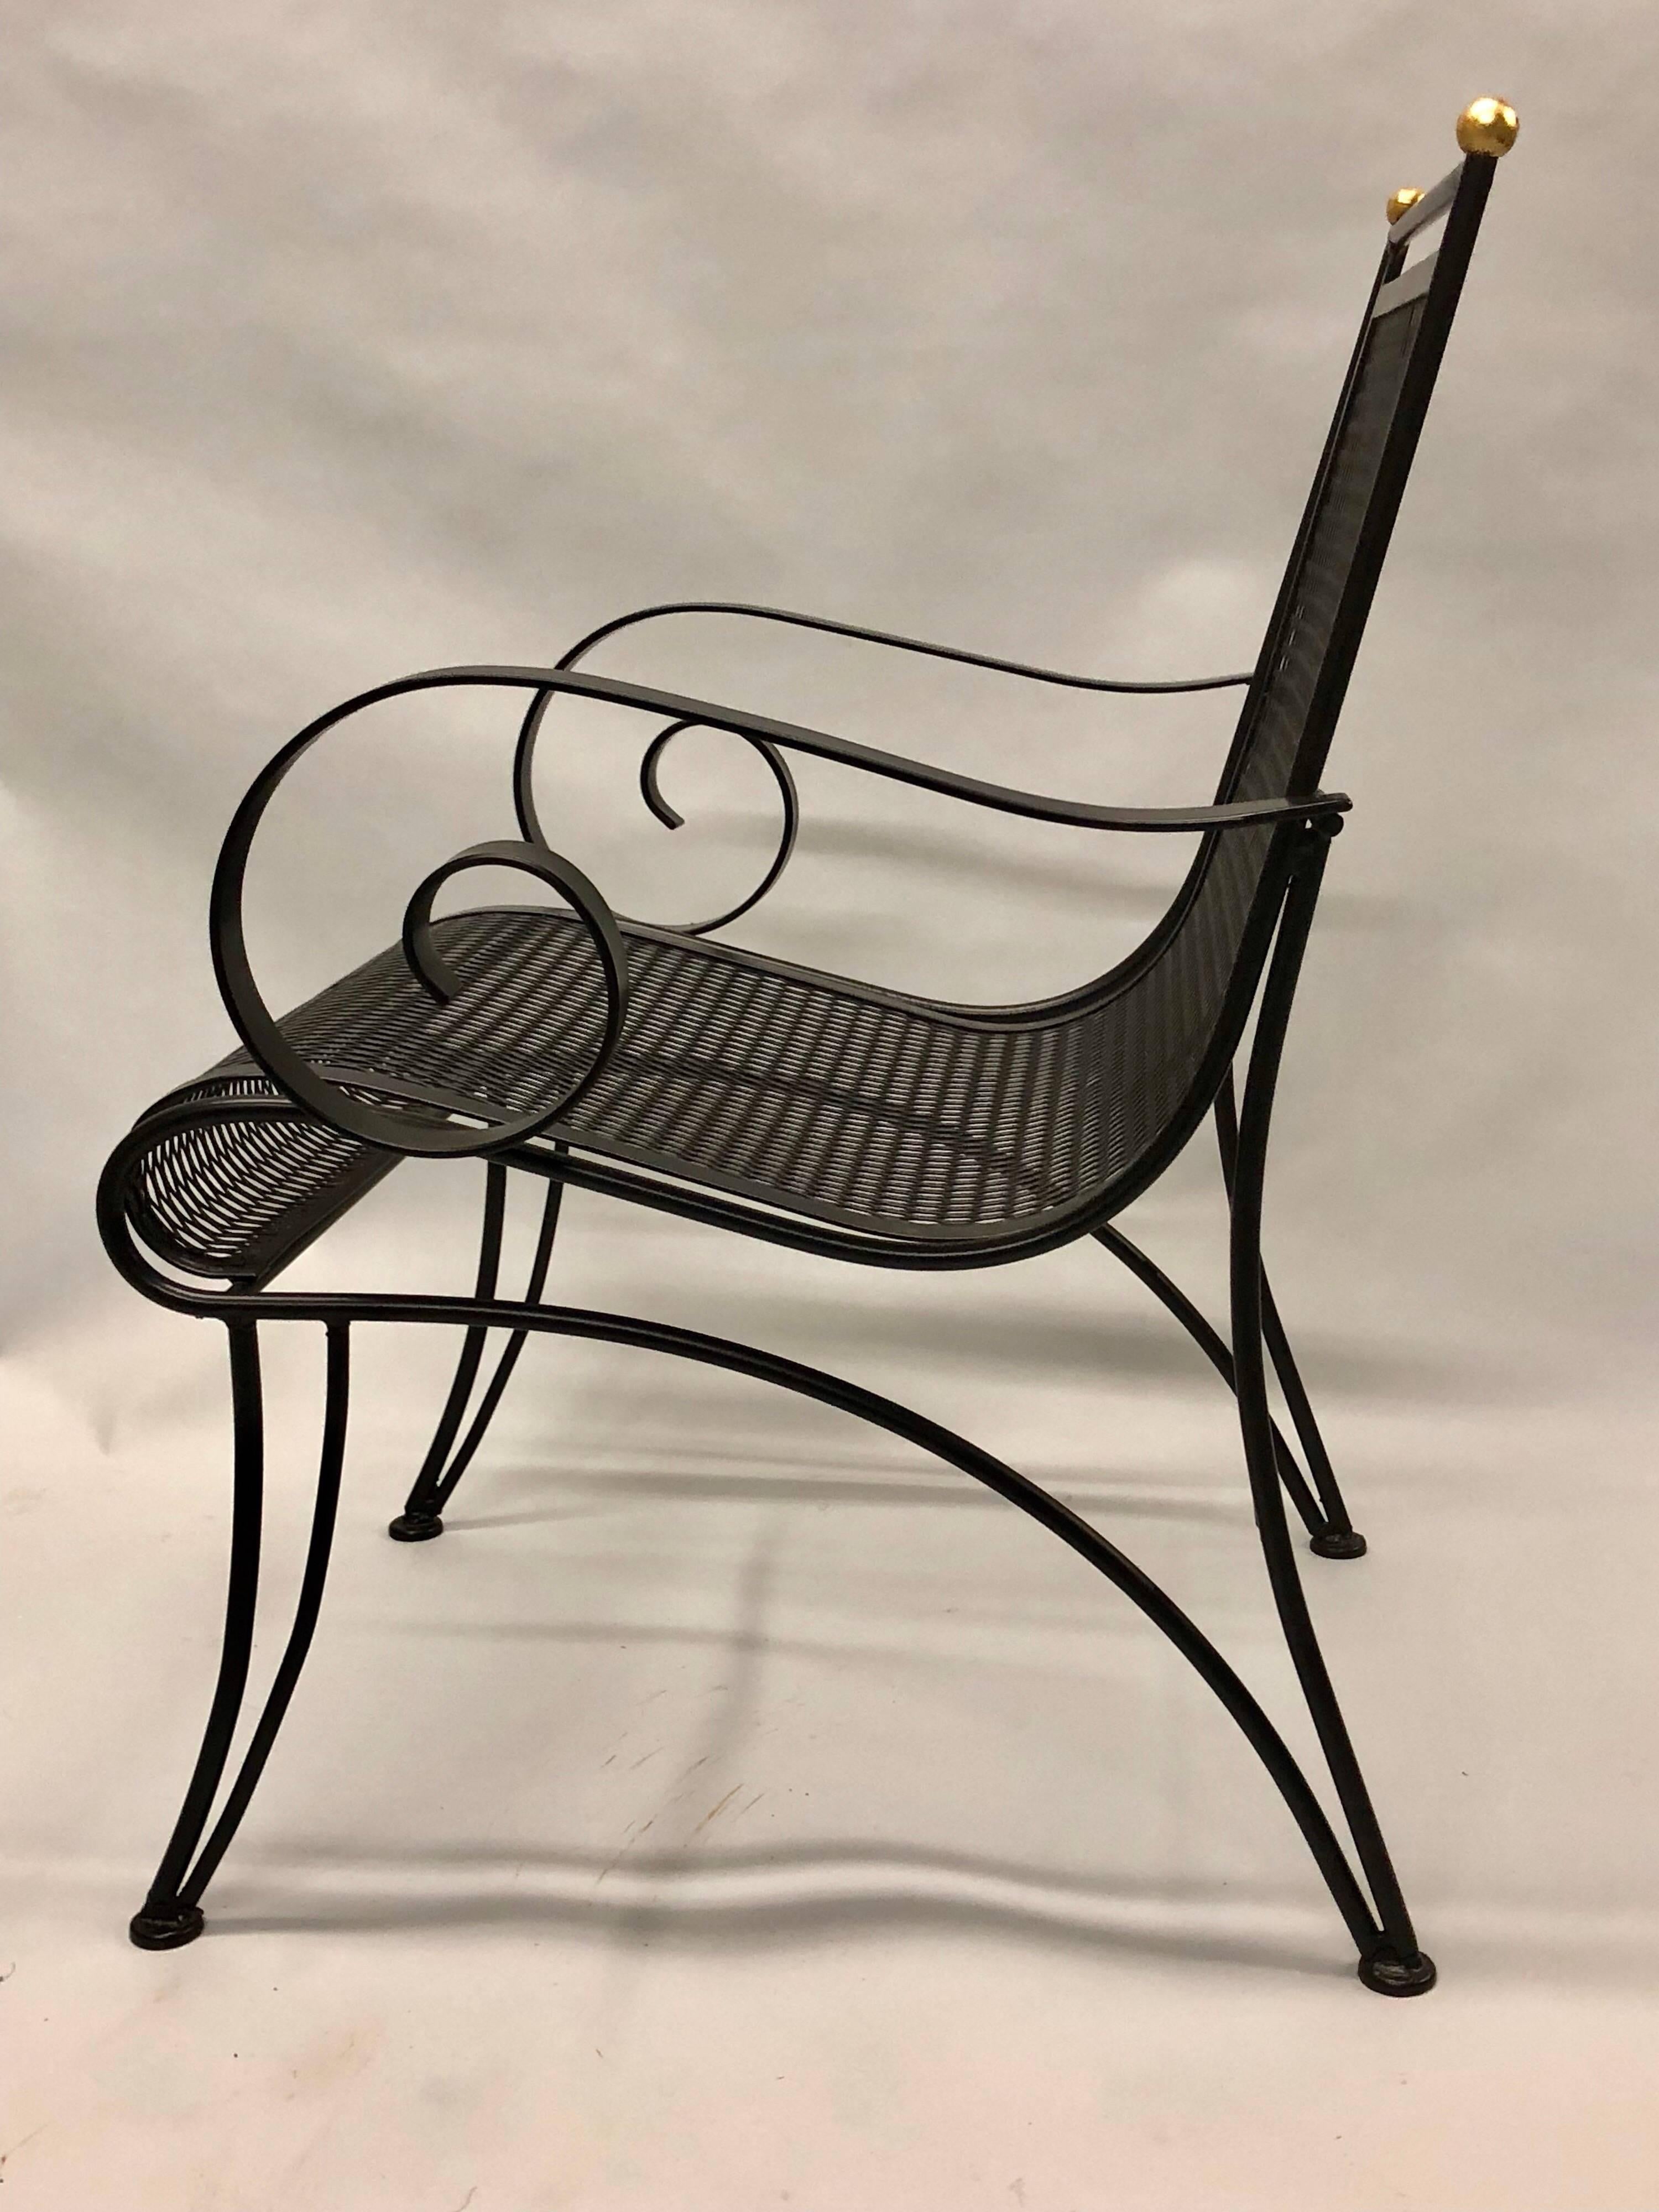 French Midcentury Partial-Gilt Wrought Iron Lounge Chairs Attributed to René Prou, Pair For Sale